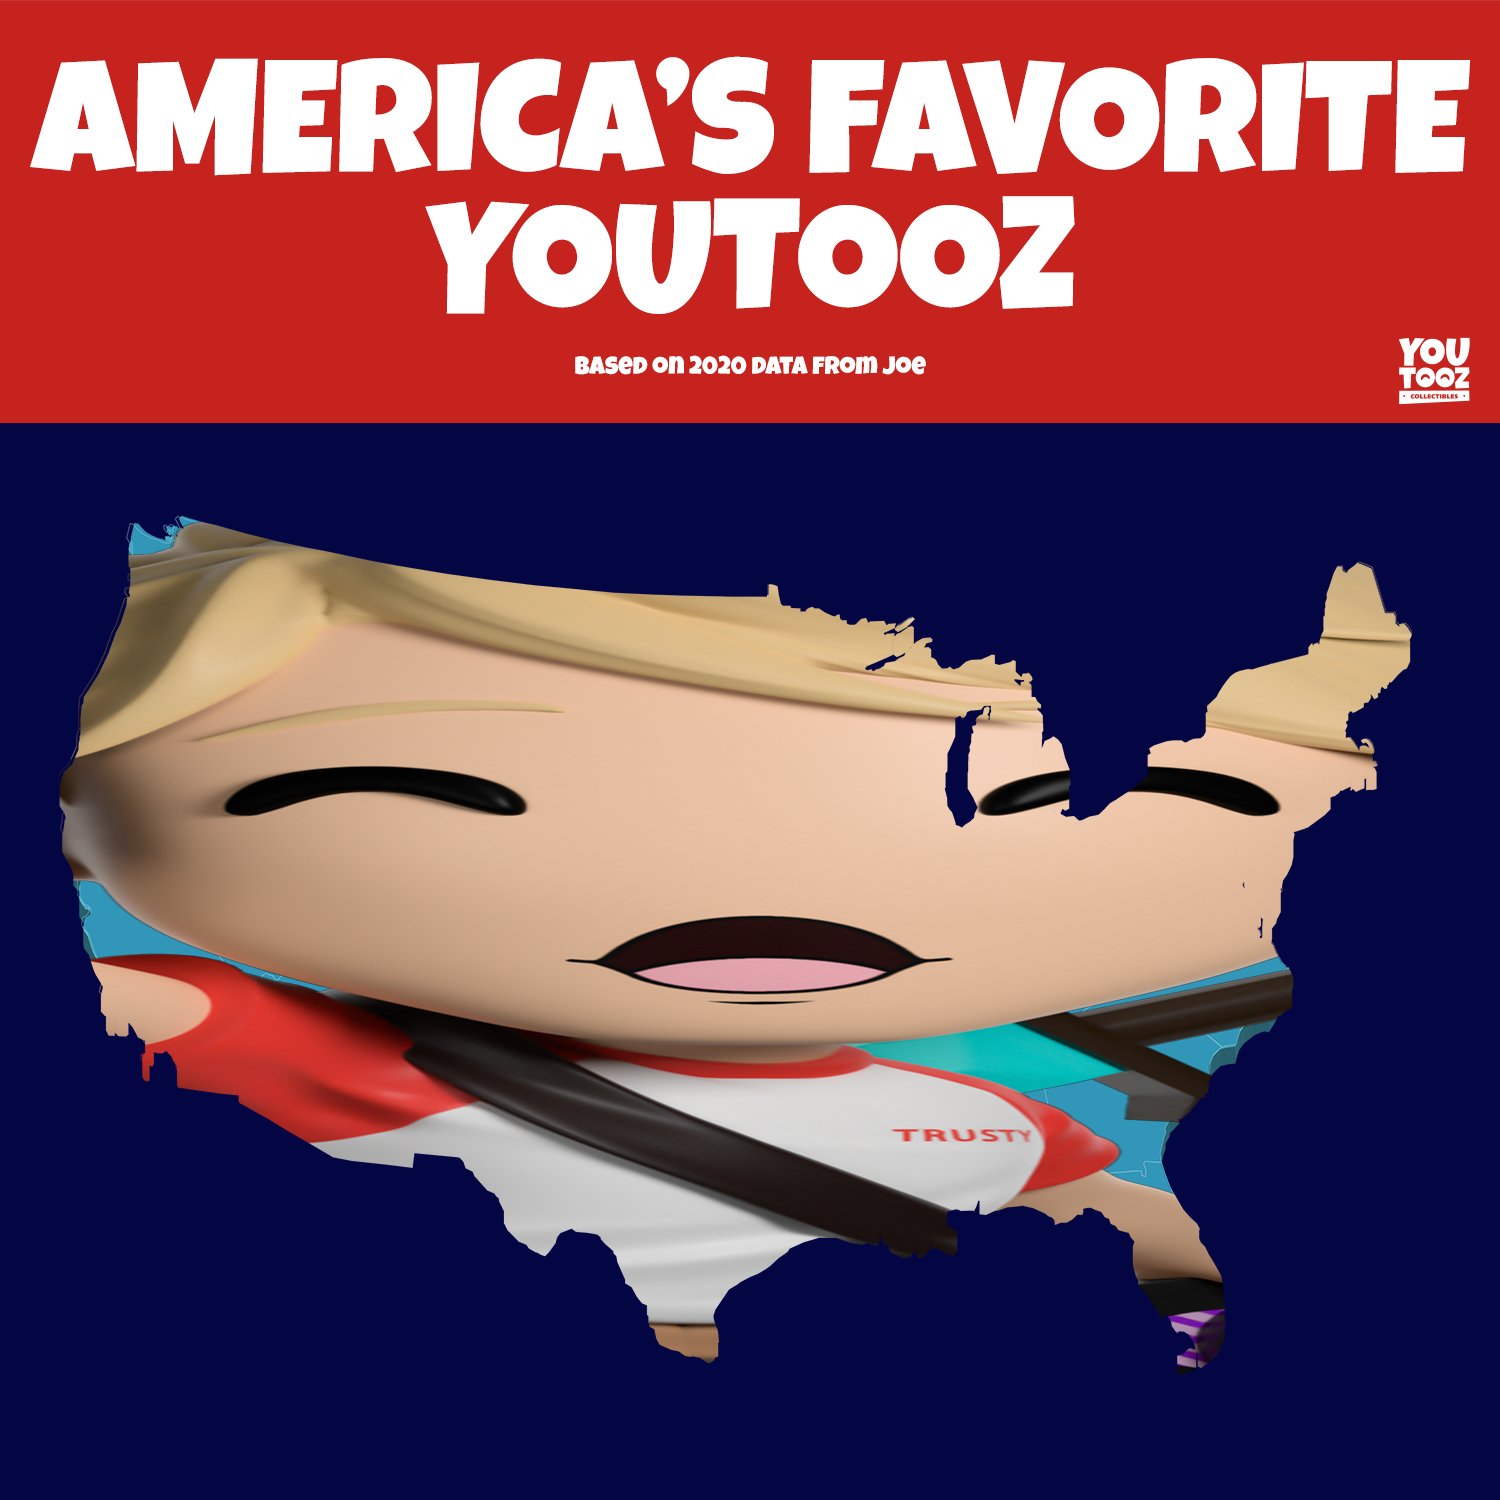 Tommyinnit – Youtooz Collectibles